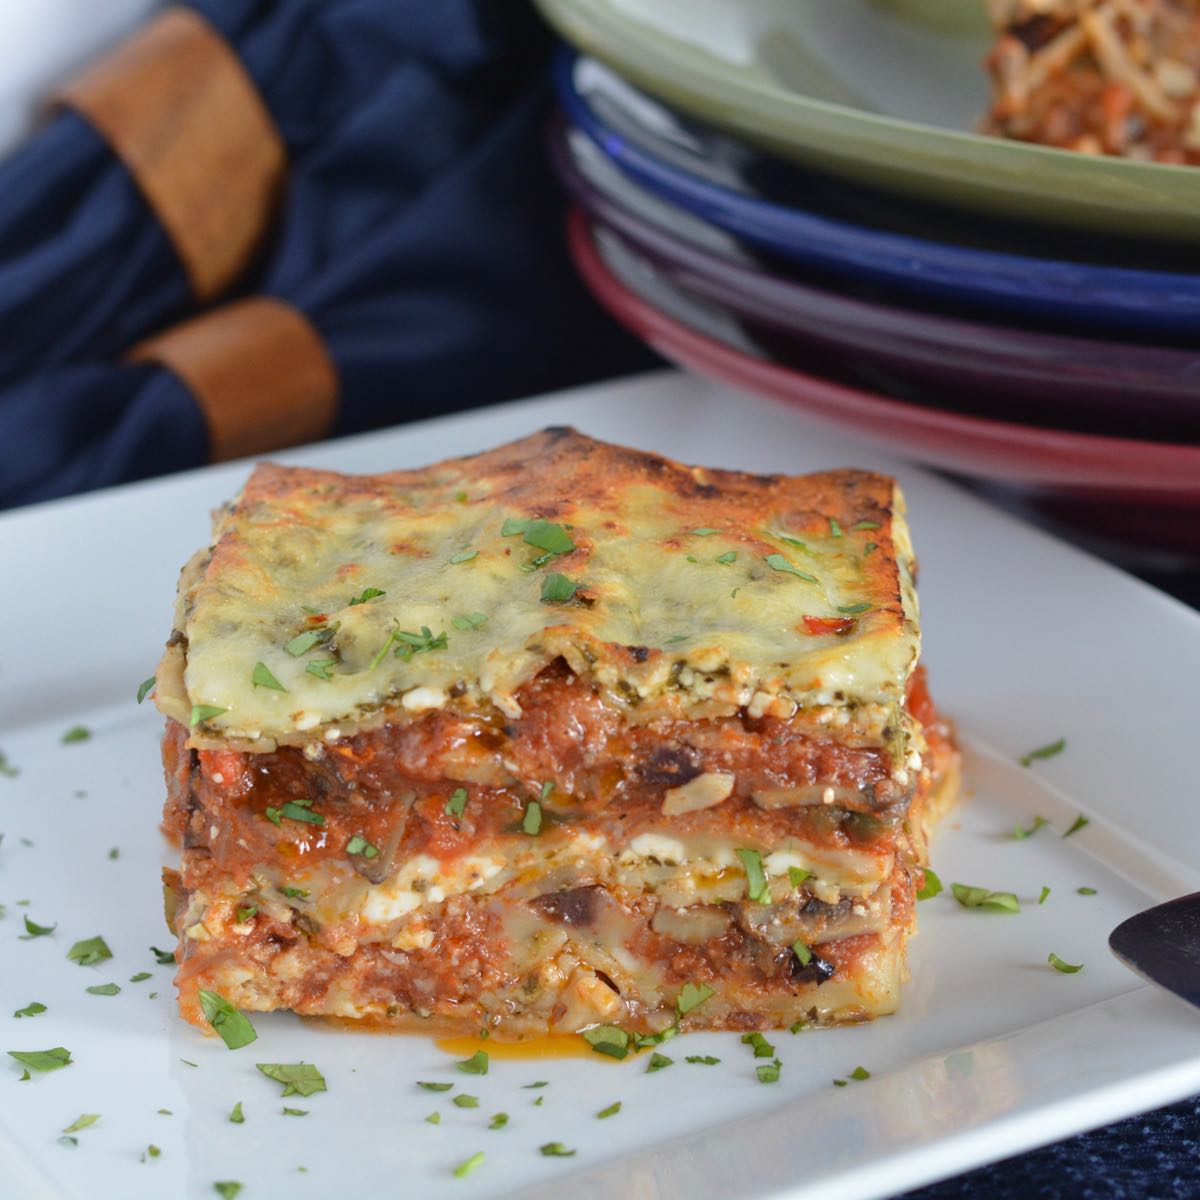 A piece of pesto lasagna sprinkled with parsley sitting beside a stack of colourful bowls.